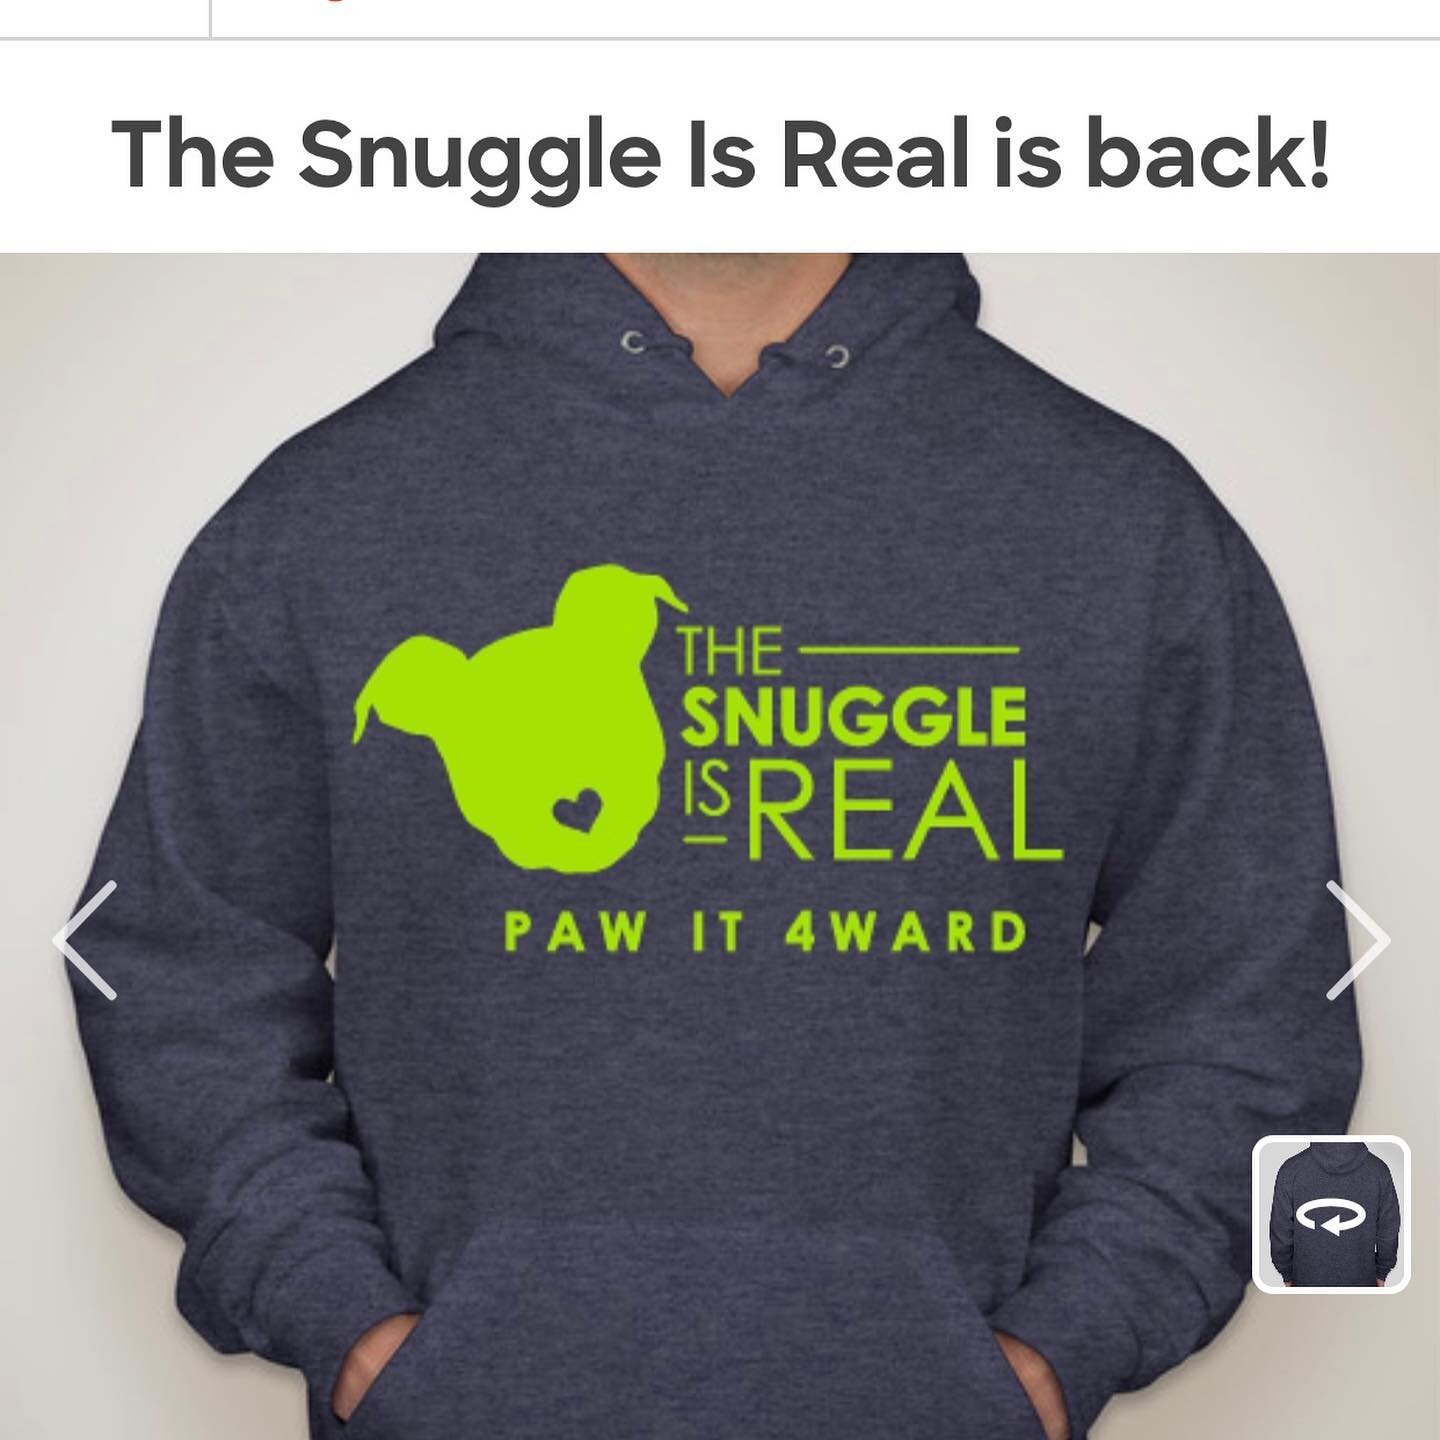 Our hoodie fundraiser ends tomorrow and we are almost to our goal of 100 hoodies sold! 
All proceeds help local animals in shelters obtain medical, training and supply sponsorships! Just click on the link in our bio and select the hoodie fundraiser! 